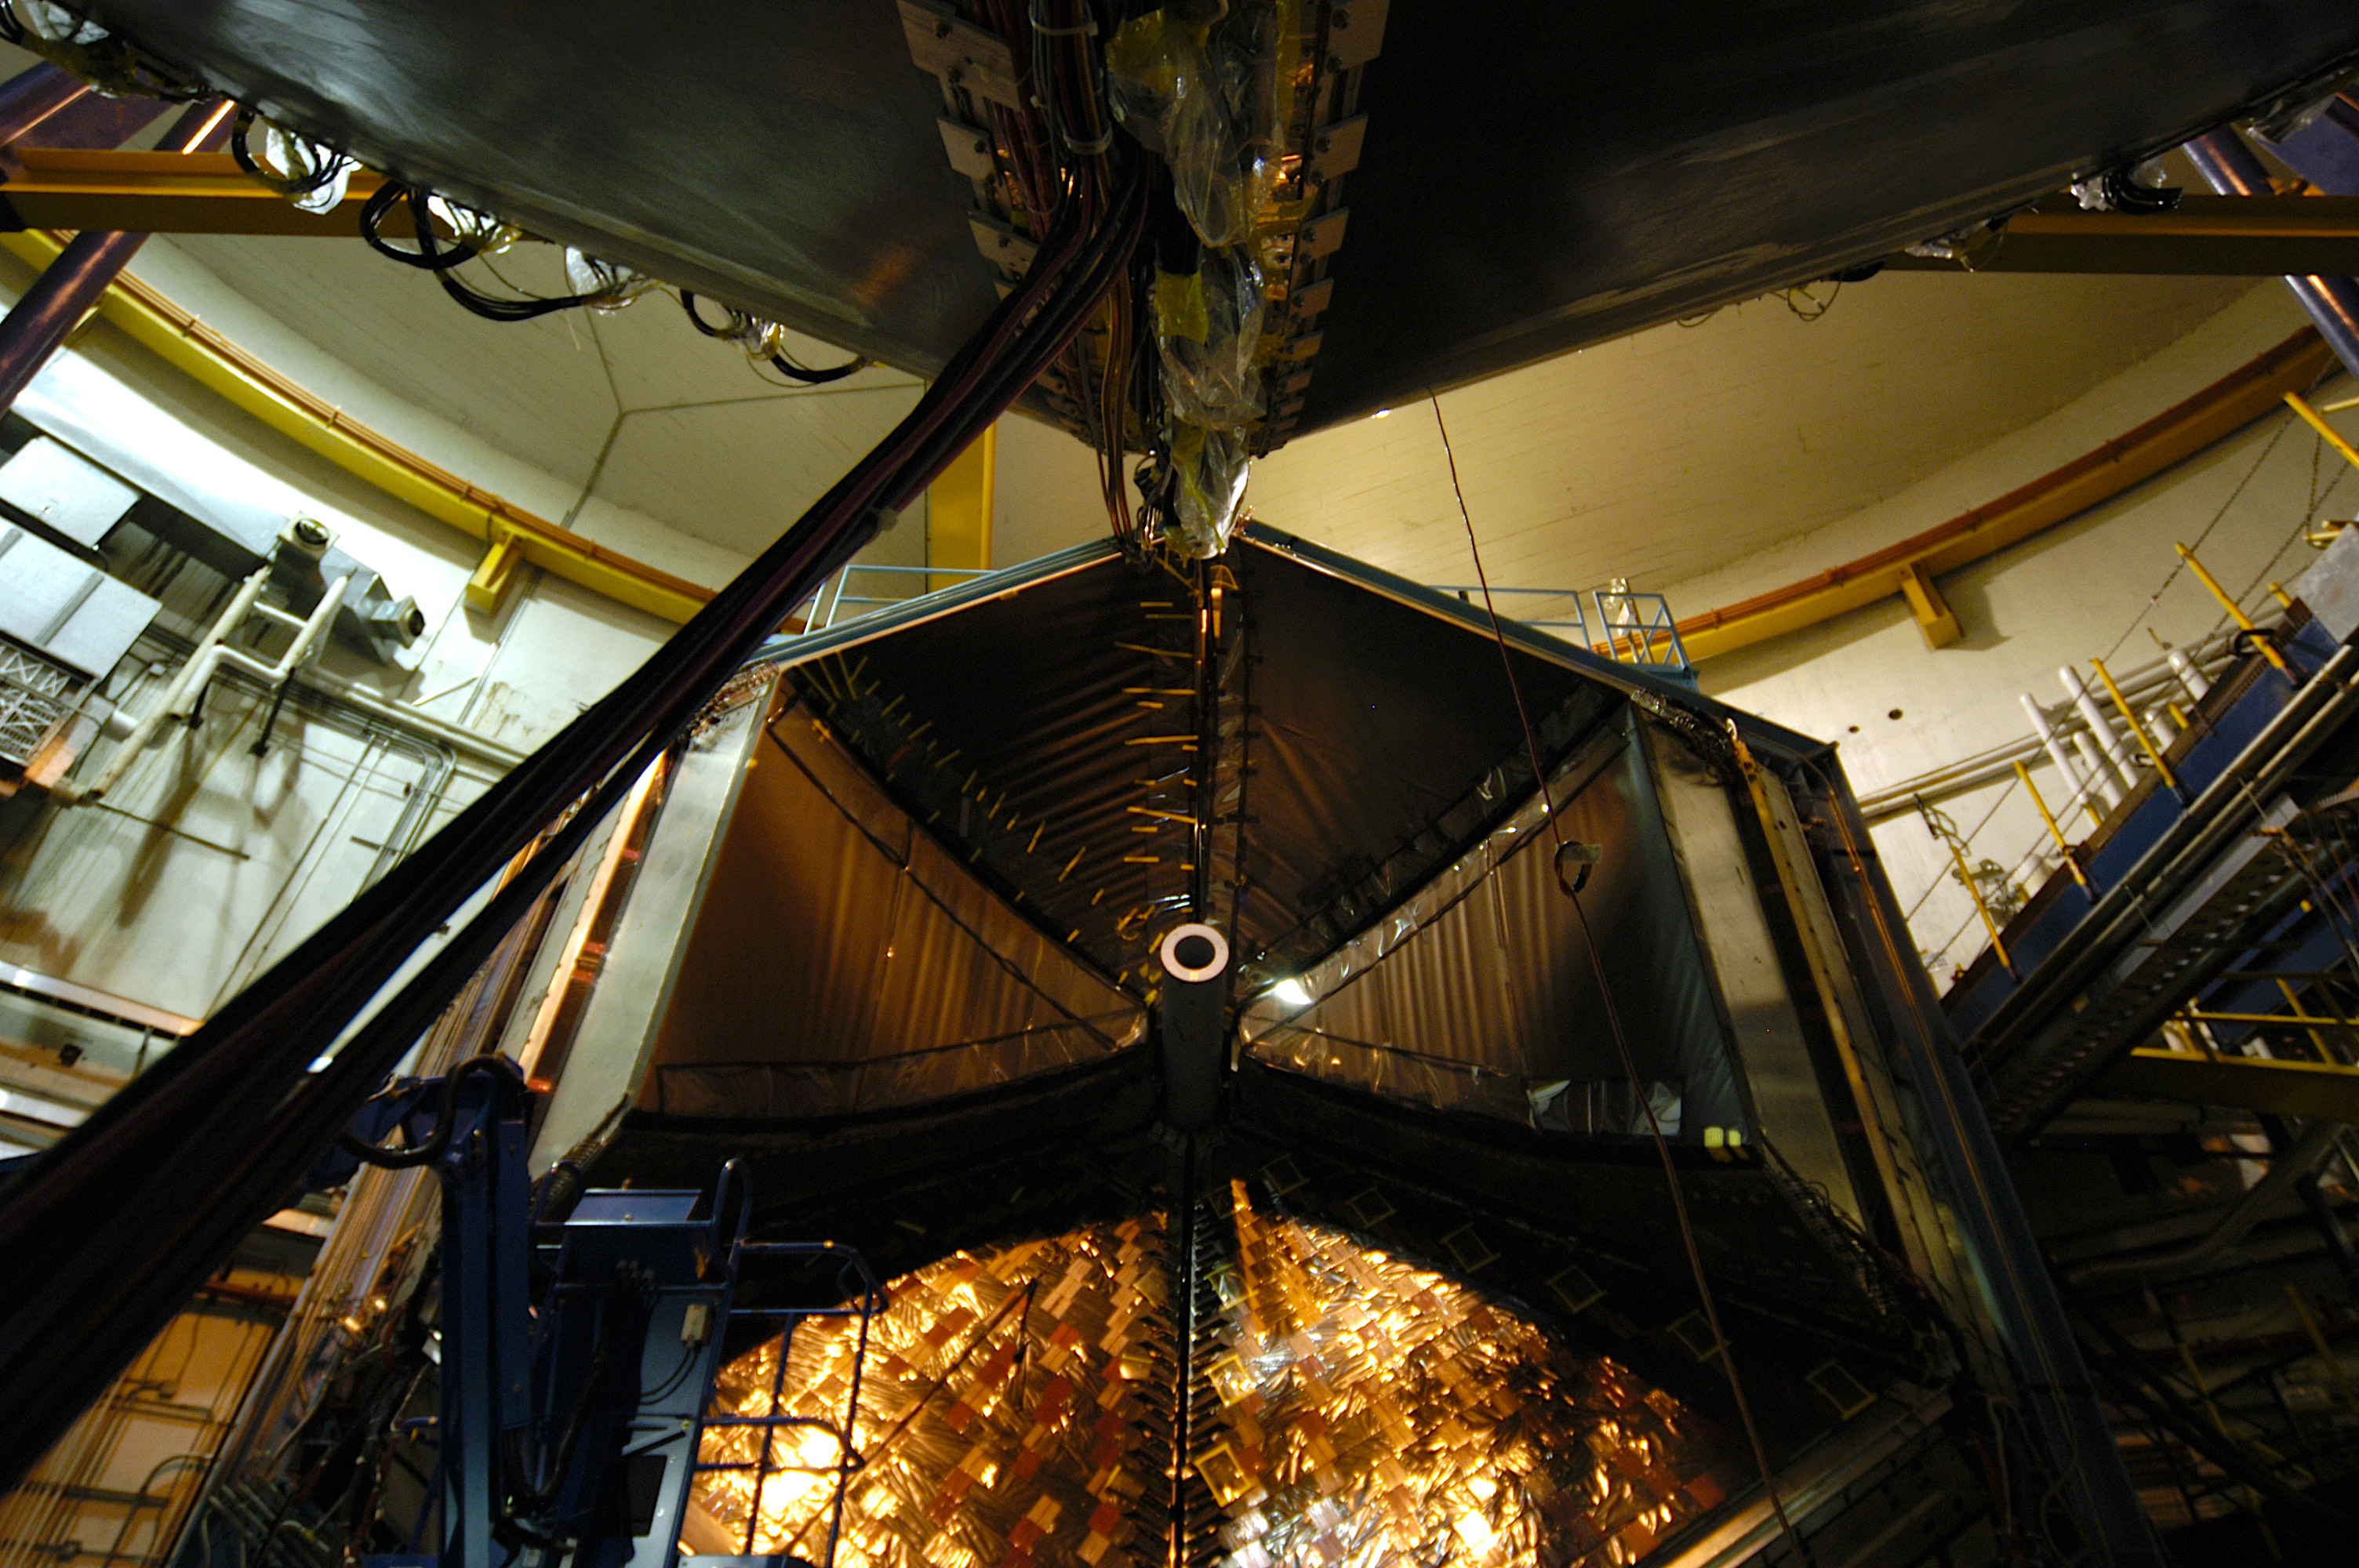 Data on Lambda particle formation came from experiments in Experimental Hall B, shown here, part of the Continuous Electron Beam Accelerator Facility.